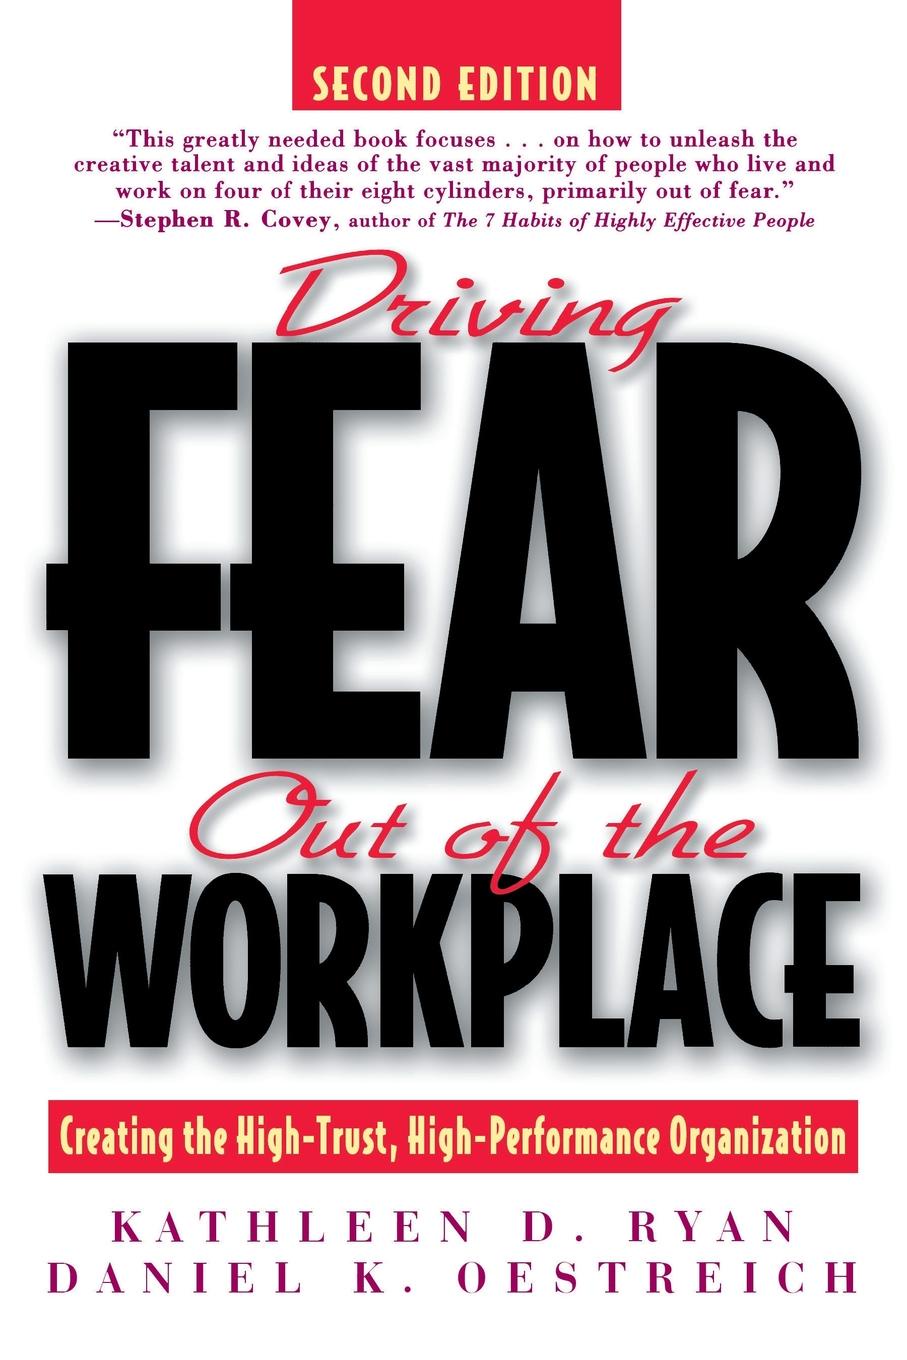 Driving Fear Out of the Workplace. Creating the High-Trust, High-Performance Organization